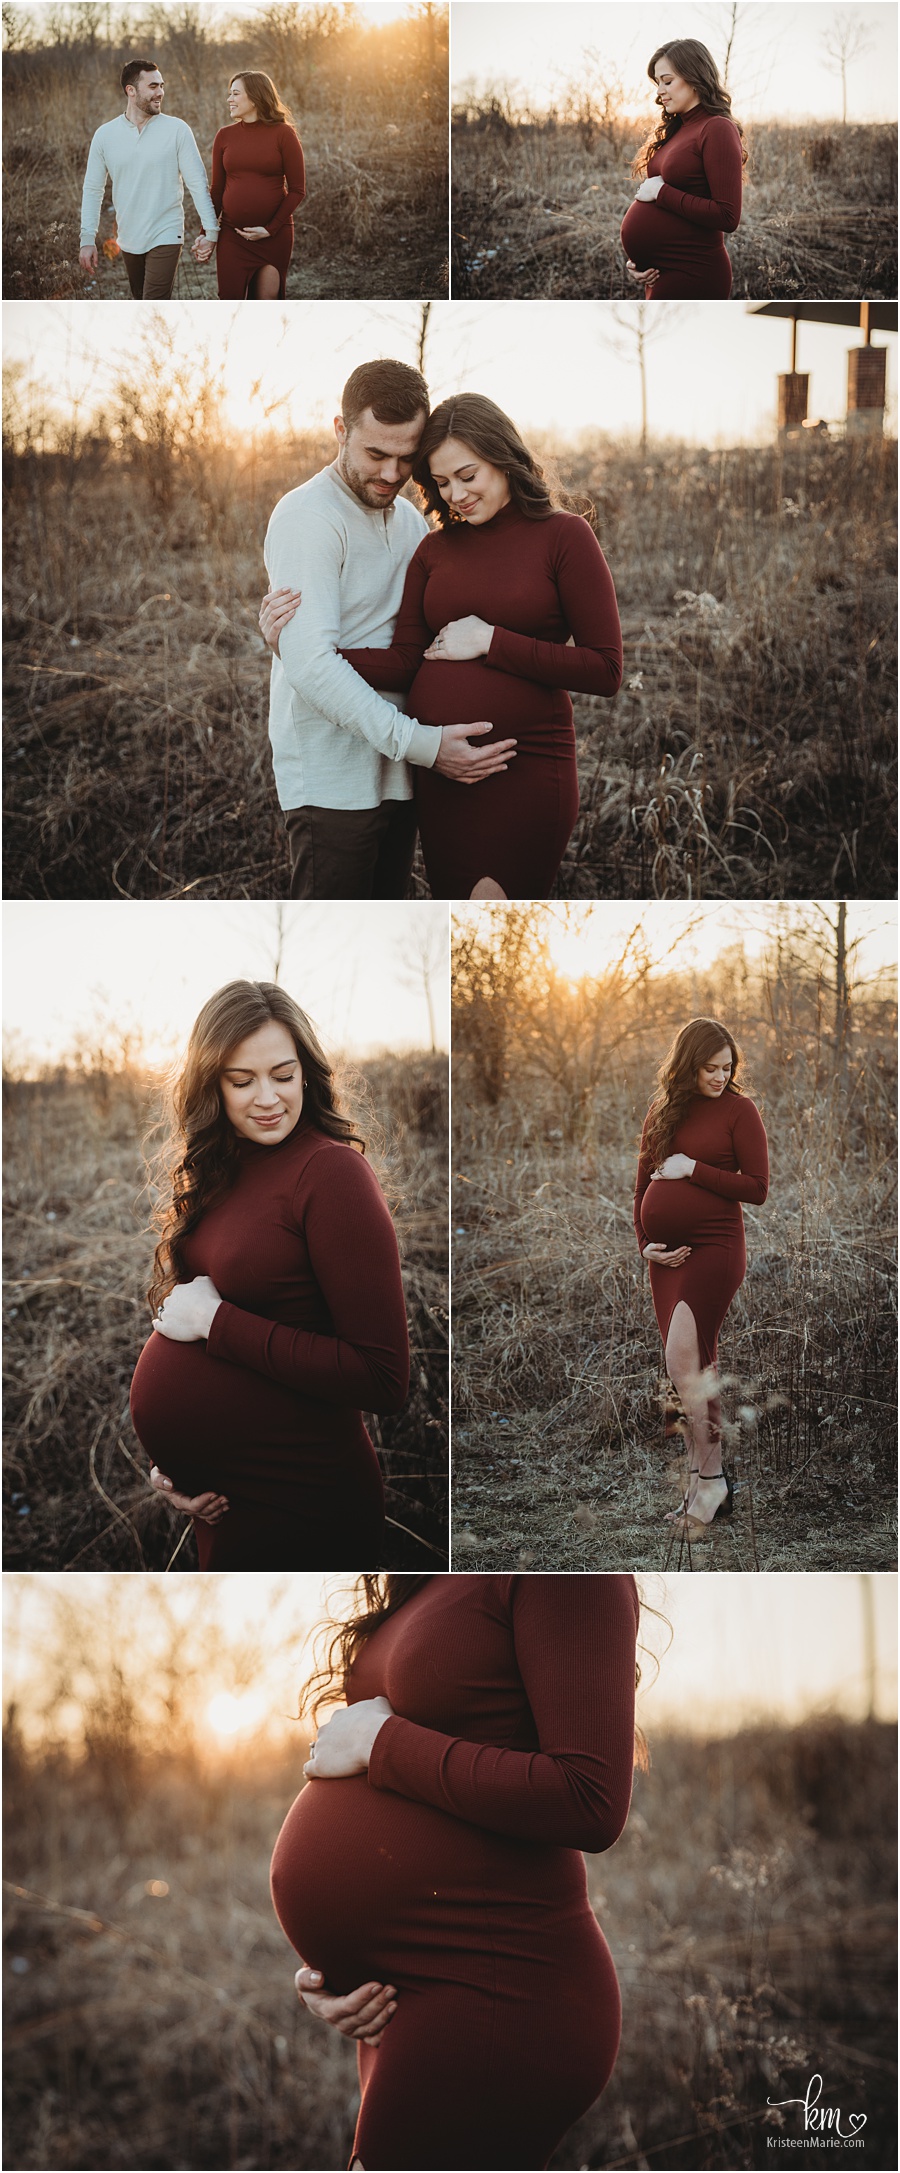 Maternity pictures at sunset - Indianapolis maternity photography